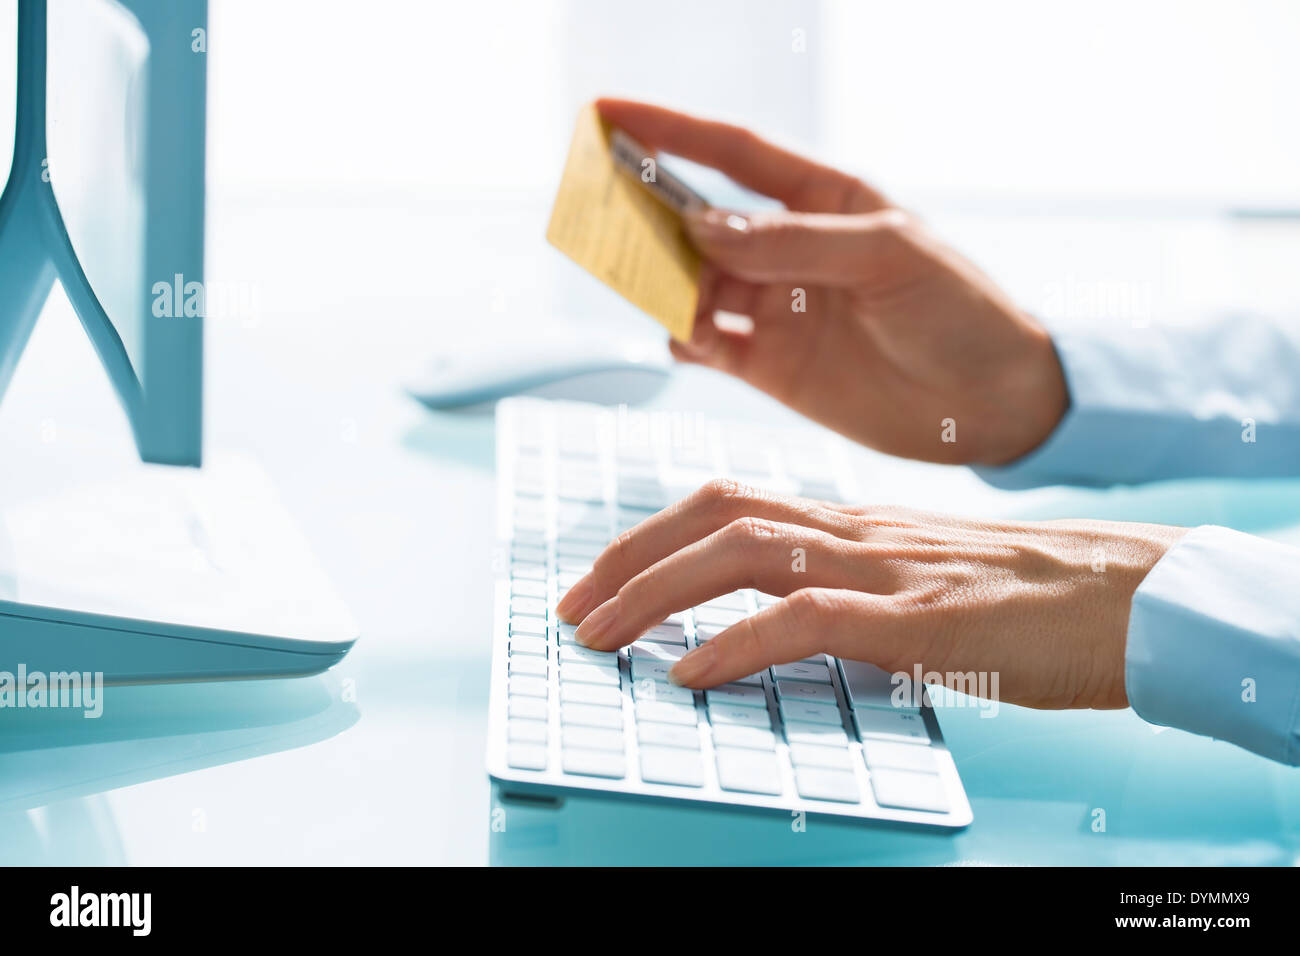 Woman Shopping on internet using computer and credit card Stock Photo